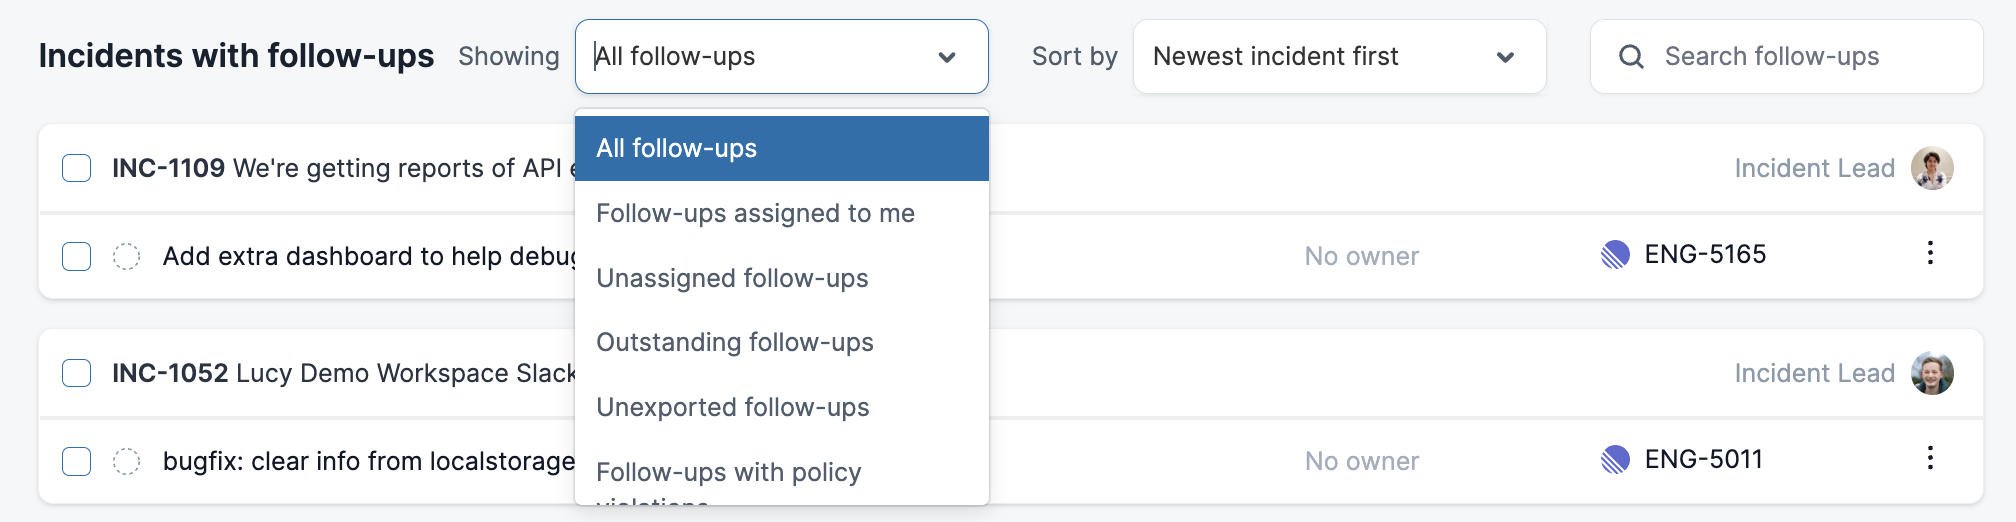 You can filter and sort based on the follow-up